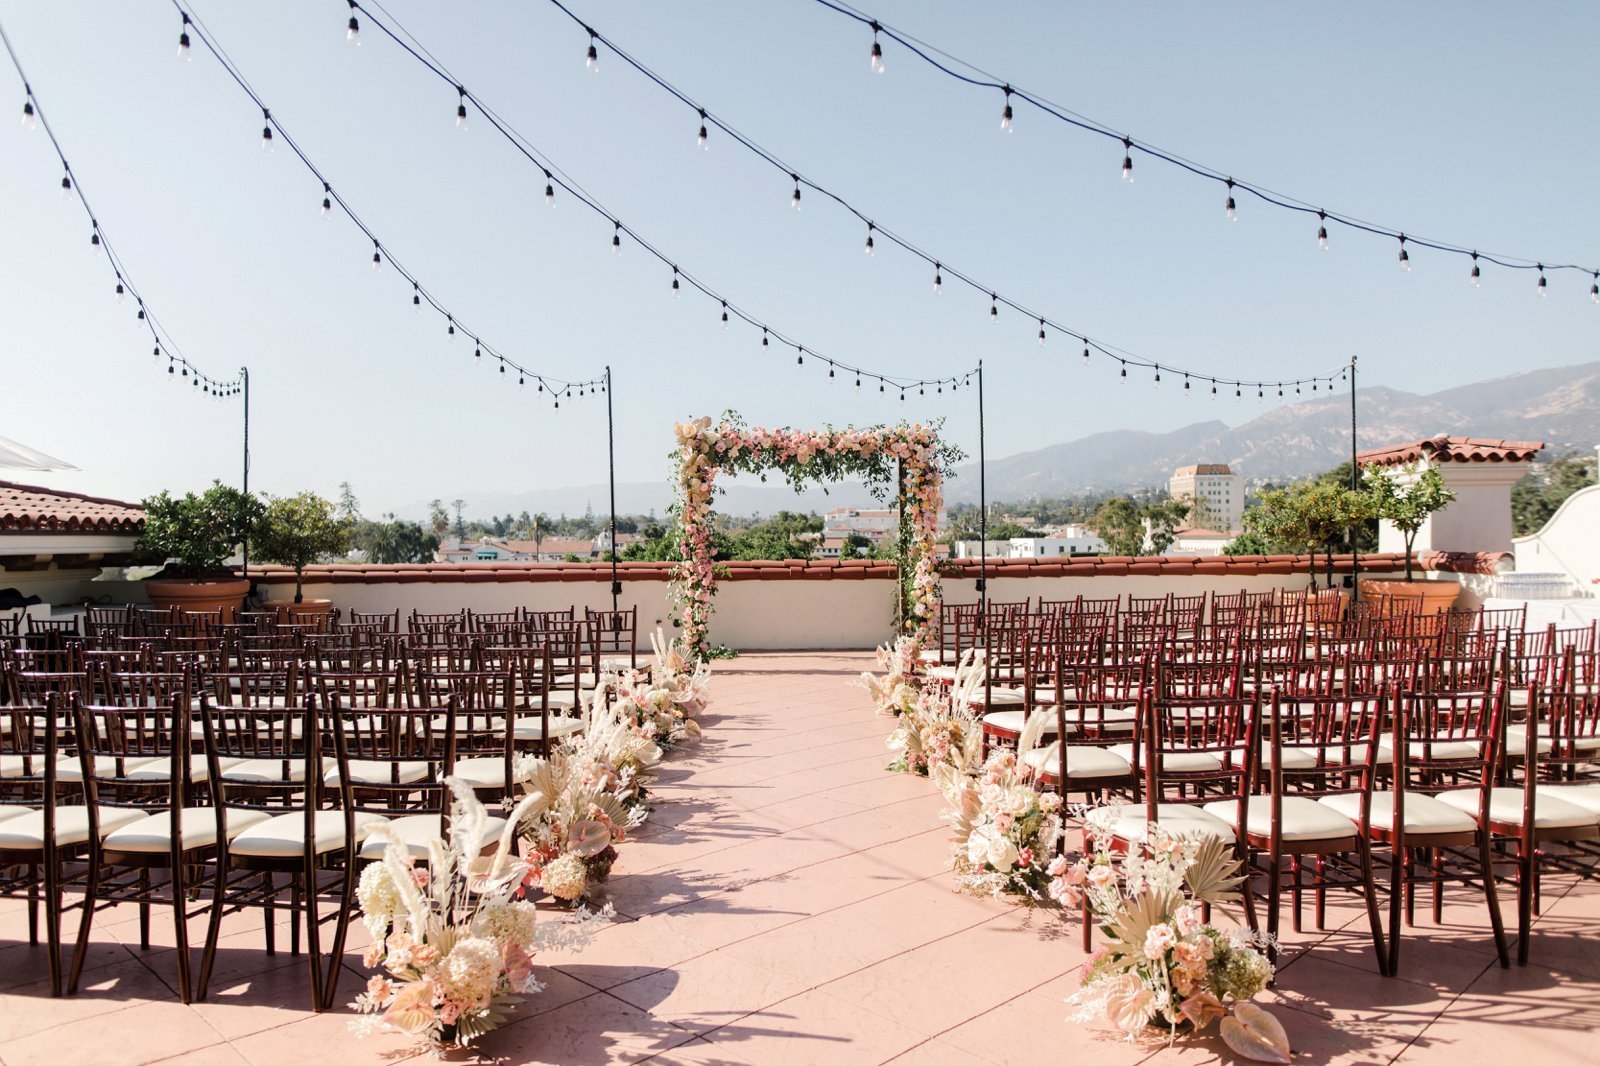 www.santabarbarawedding.com | Kimpton Canary Hotel | Anna Delores Photography | Ceremony Set Up with Panoramic Views and String Lights Overhead